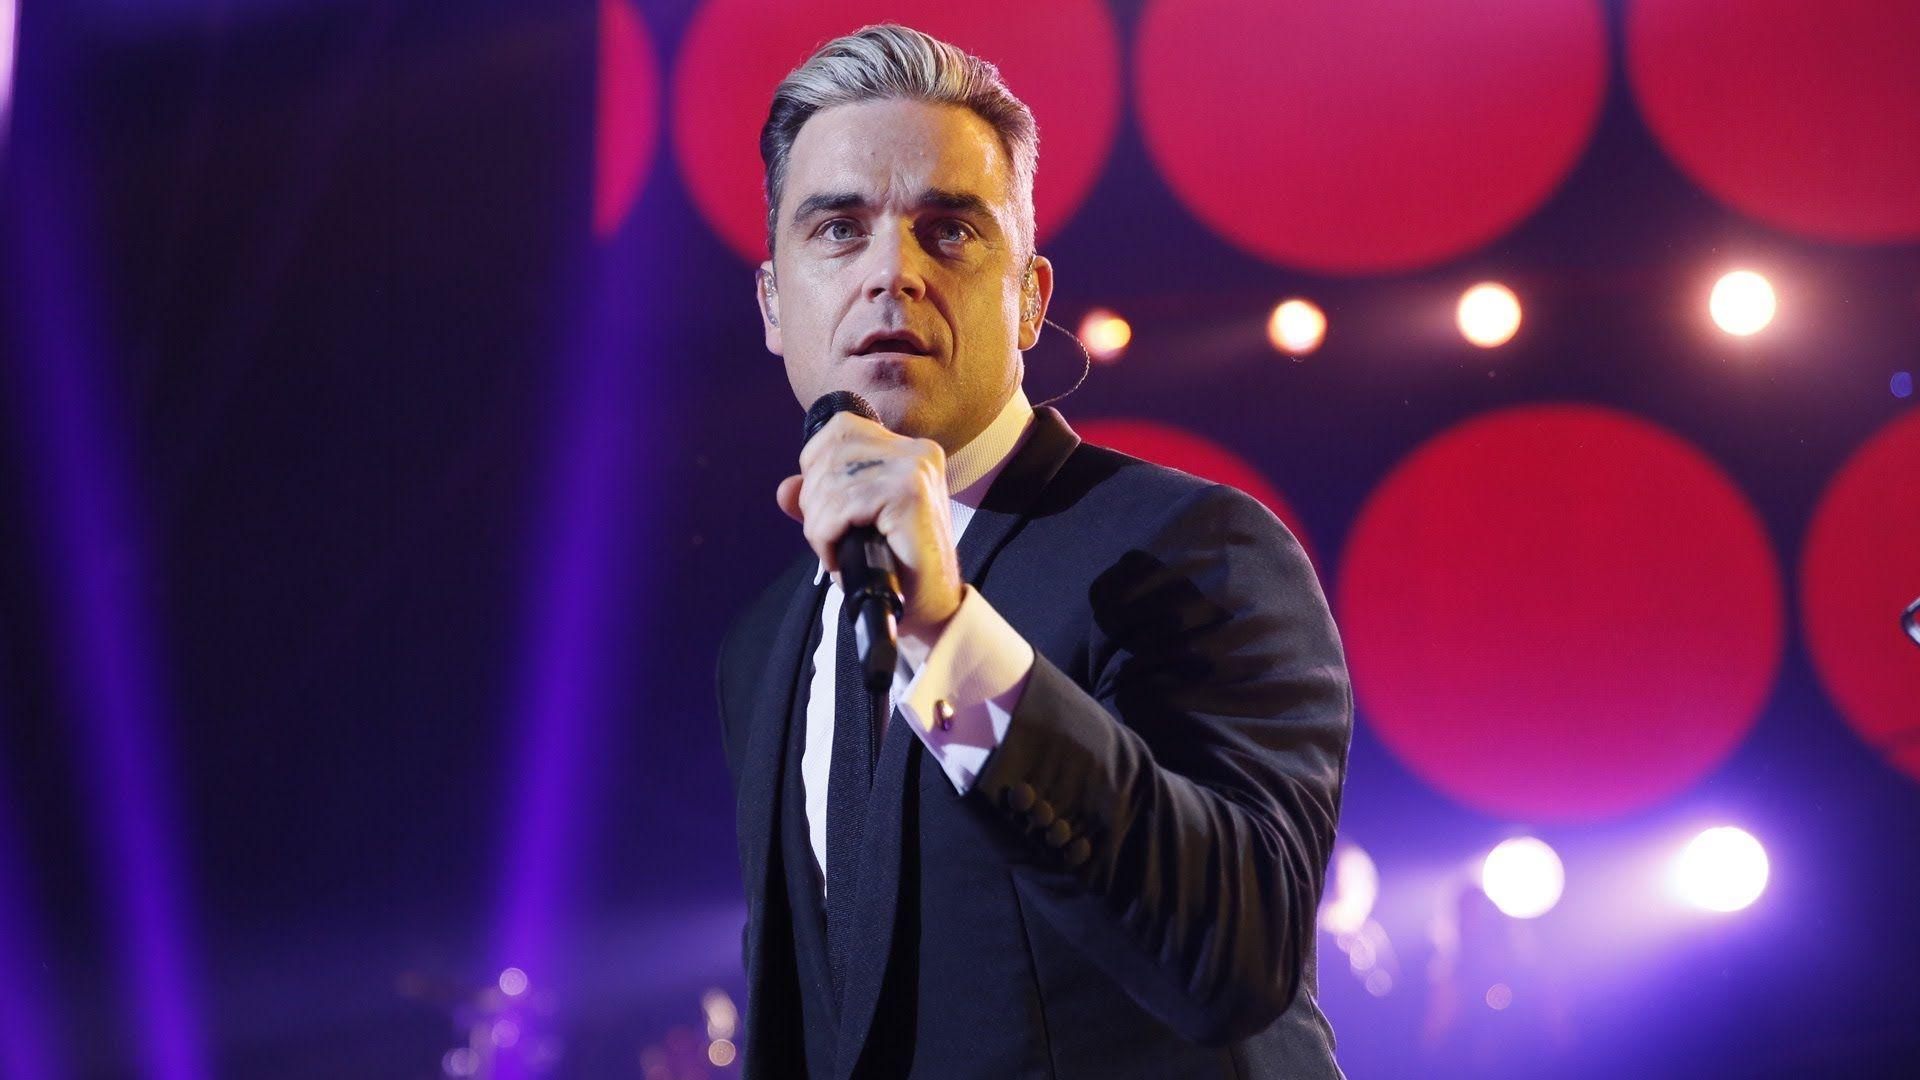 Robbie Williams My Shoes at Children In Need Rocks 2013